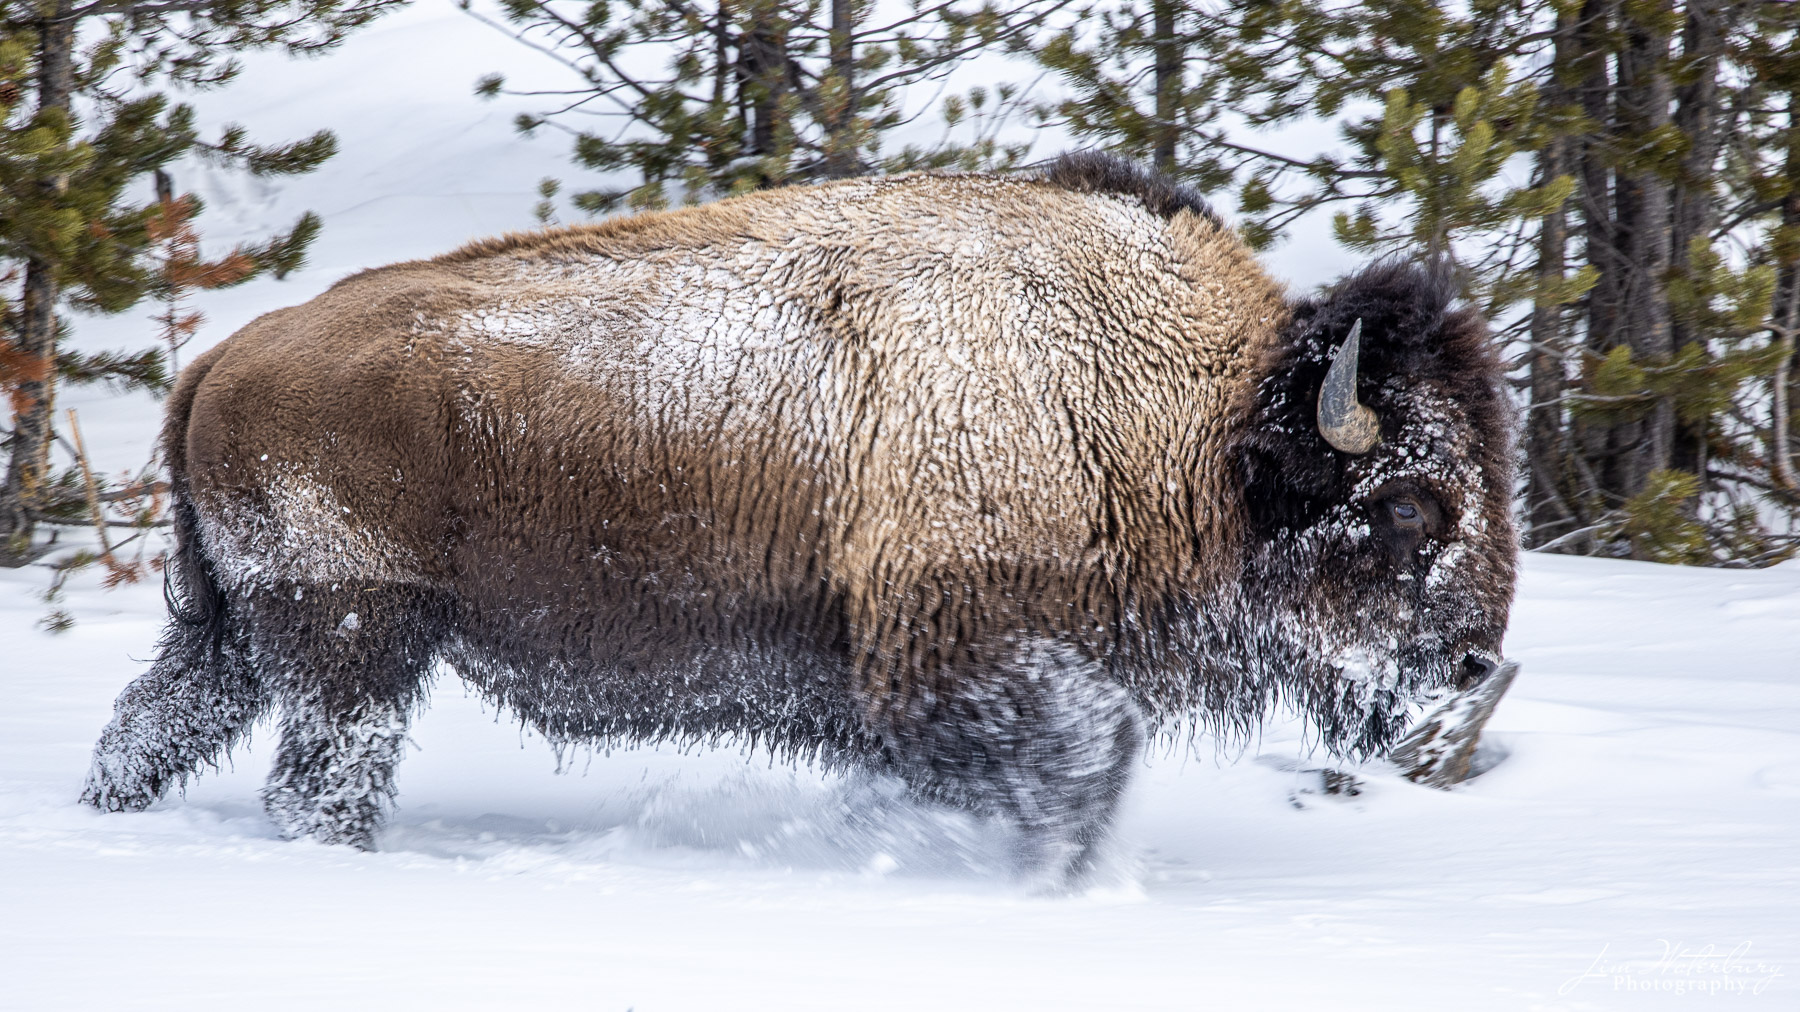 A large bison on the move through the deep snow in Yellowstone.